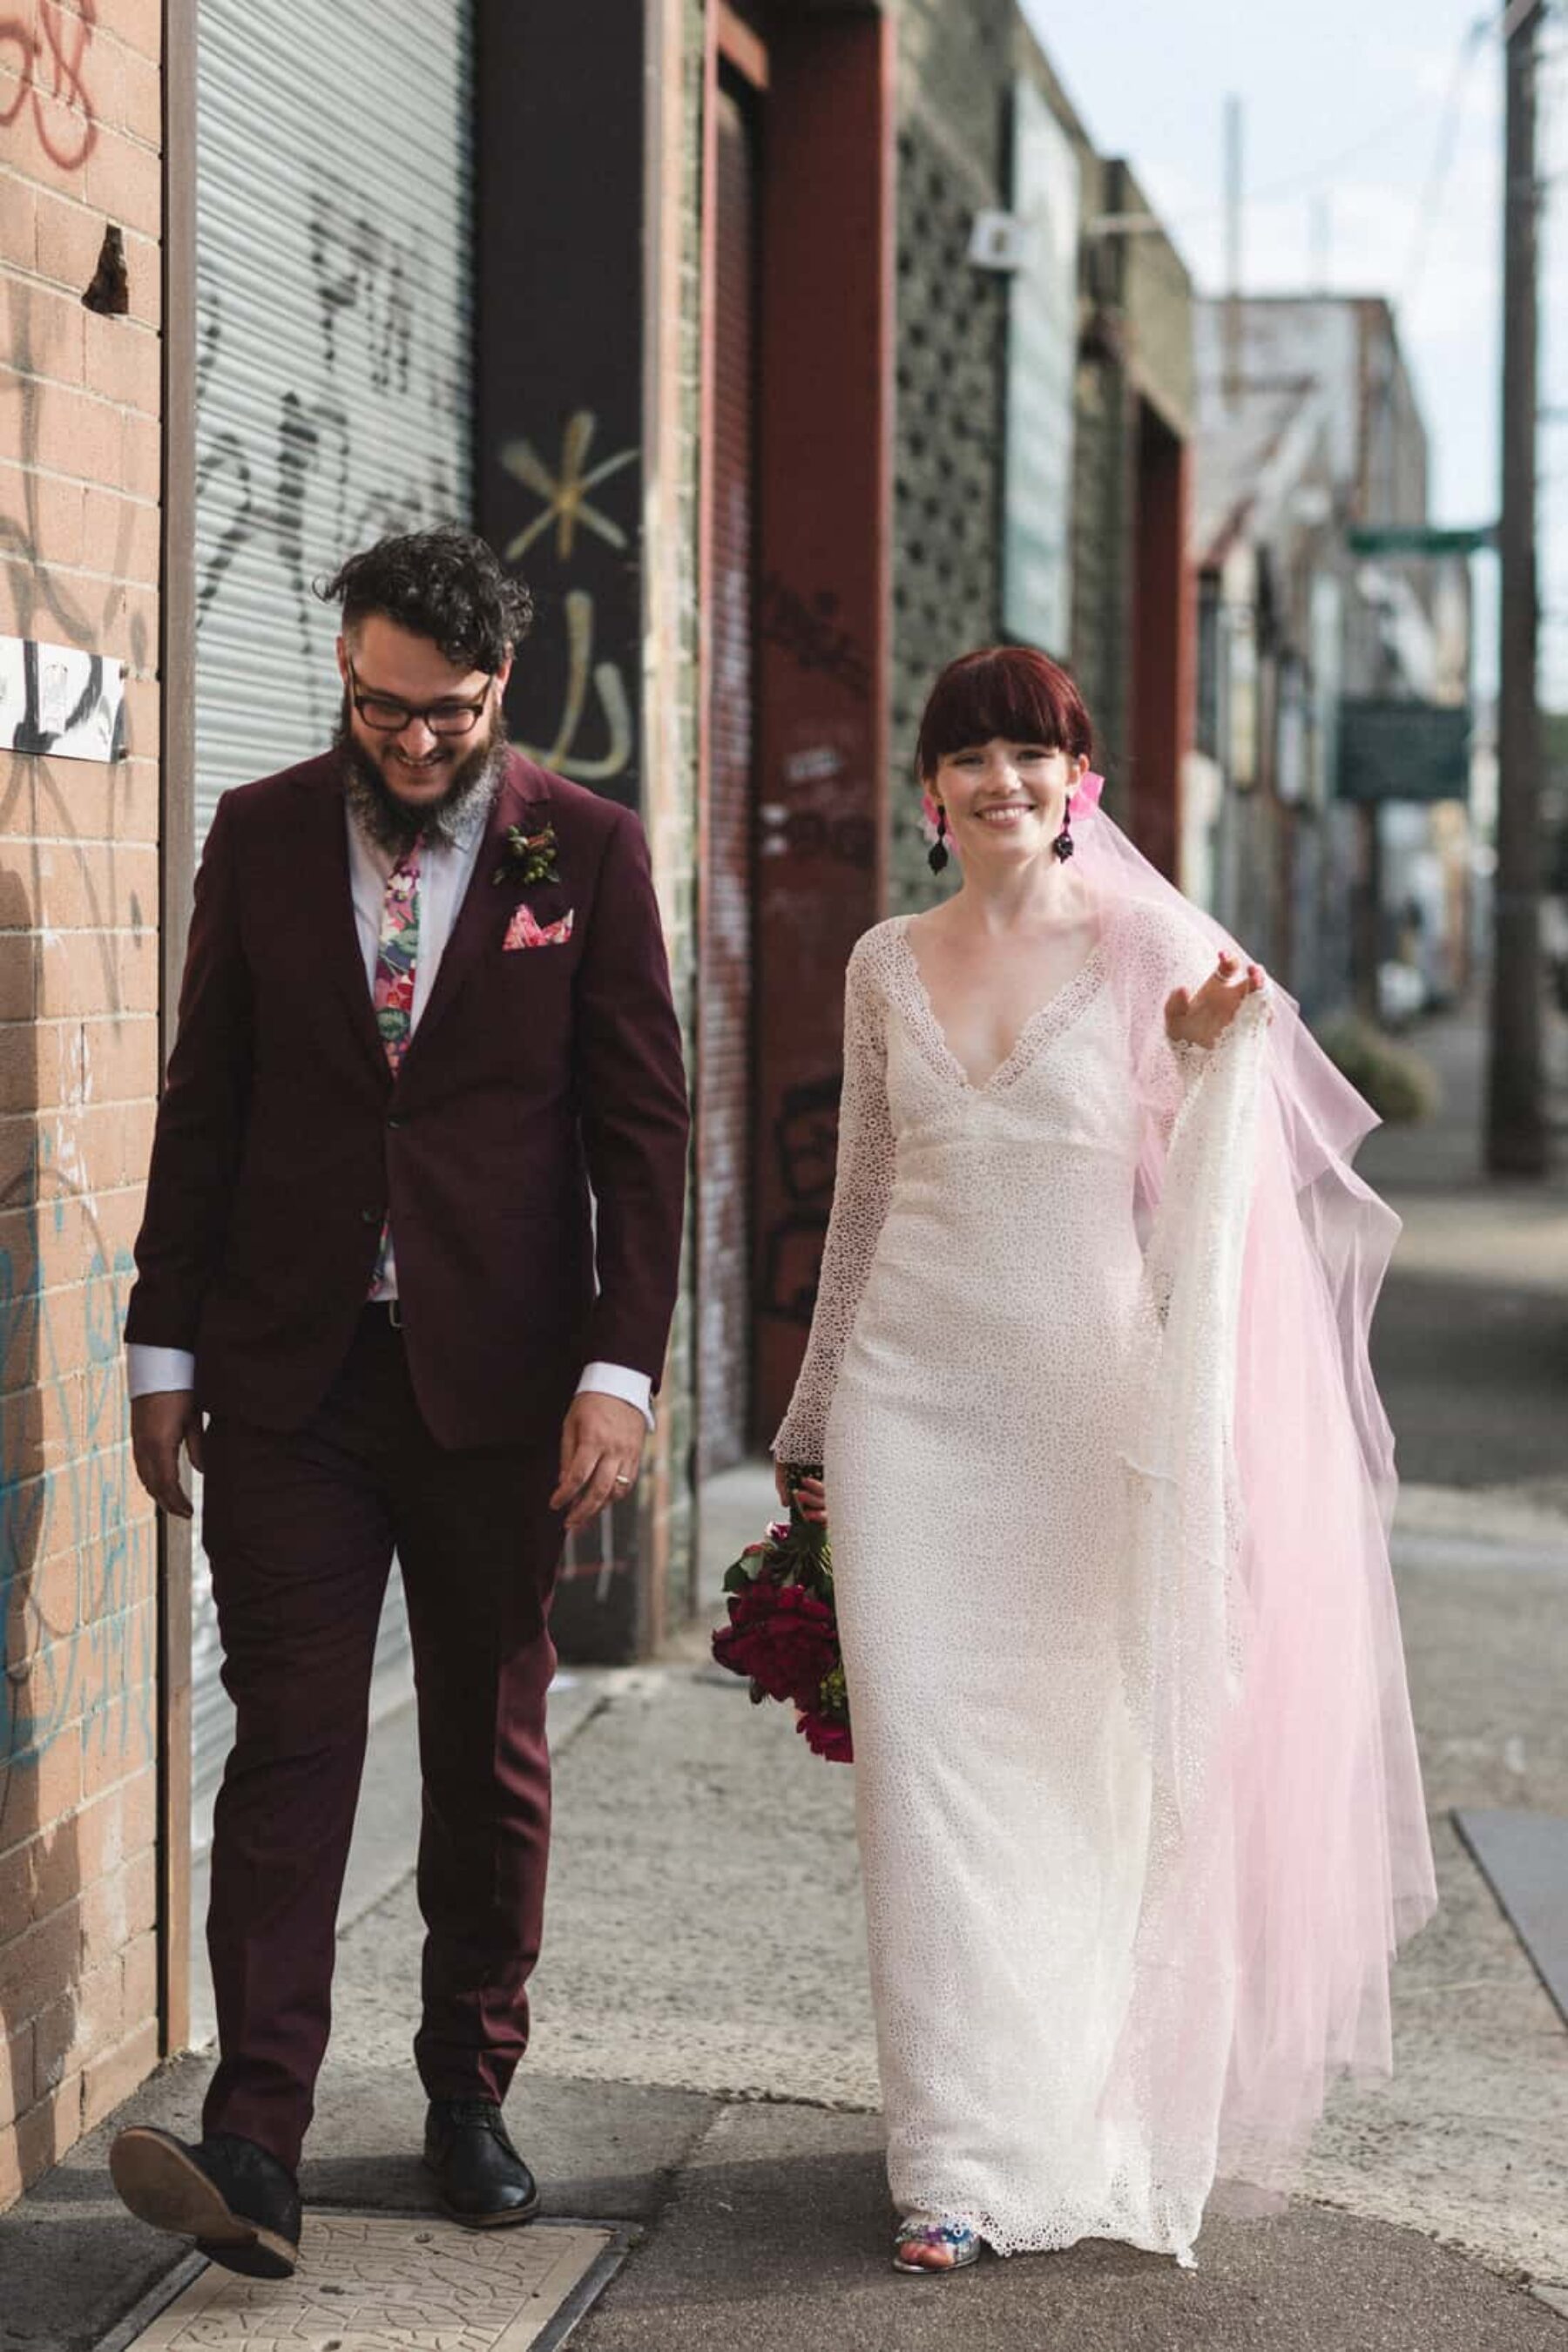 bearded groom and bride with pink tulle veil